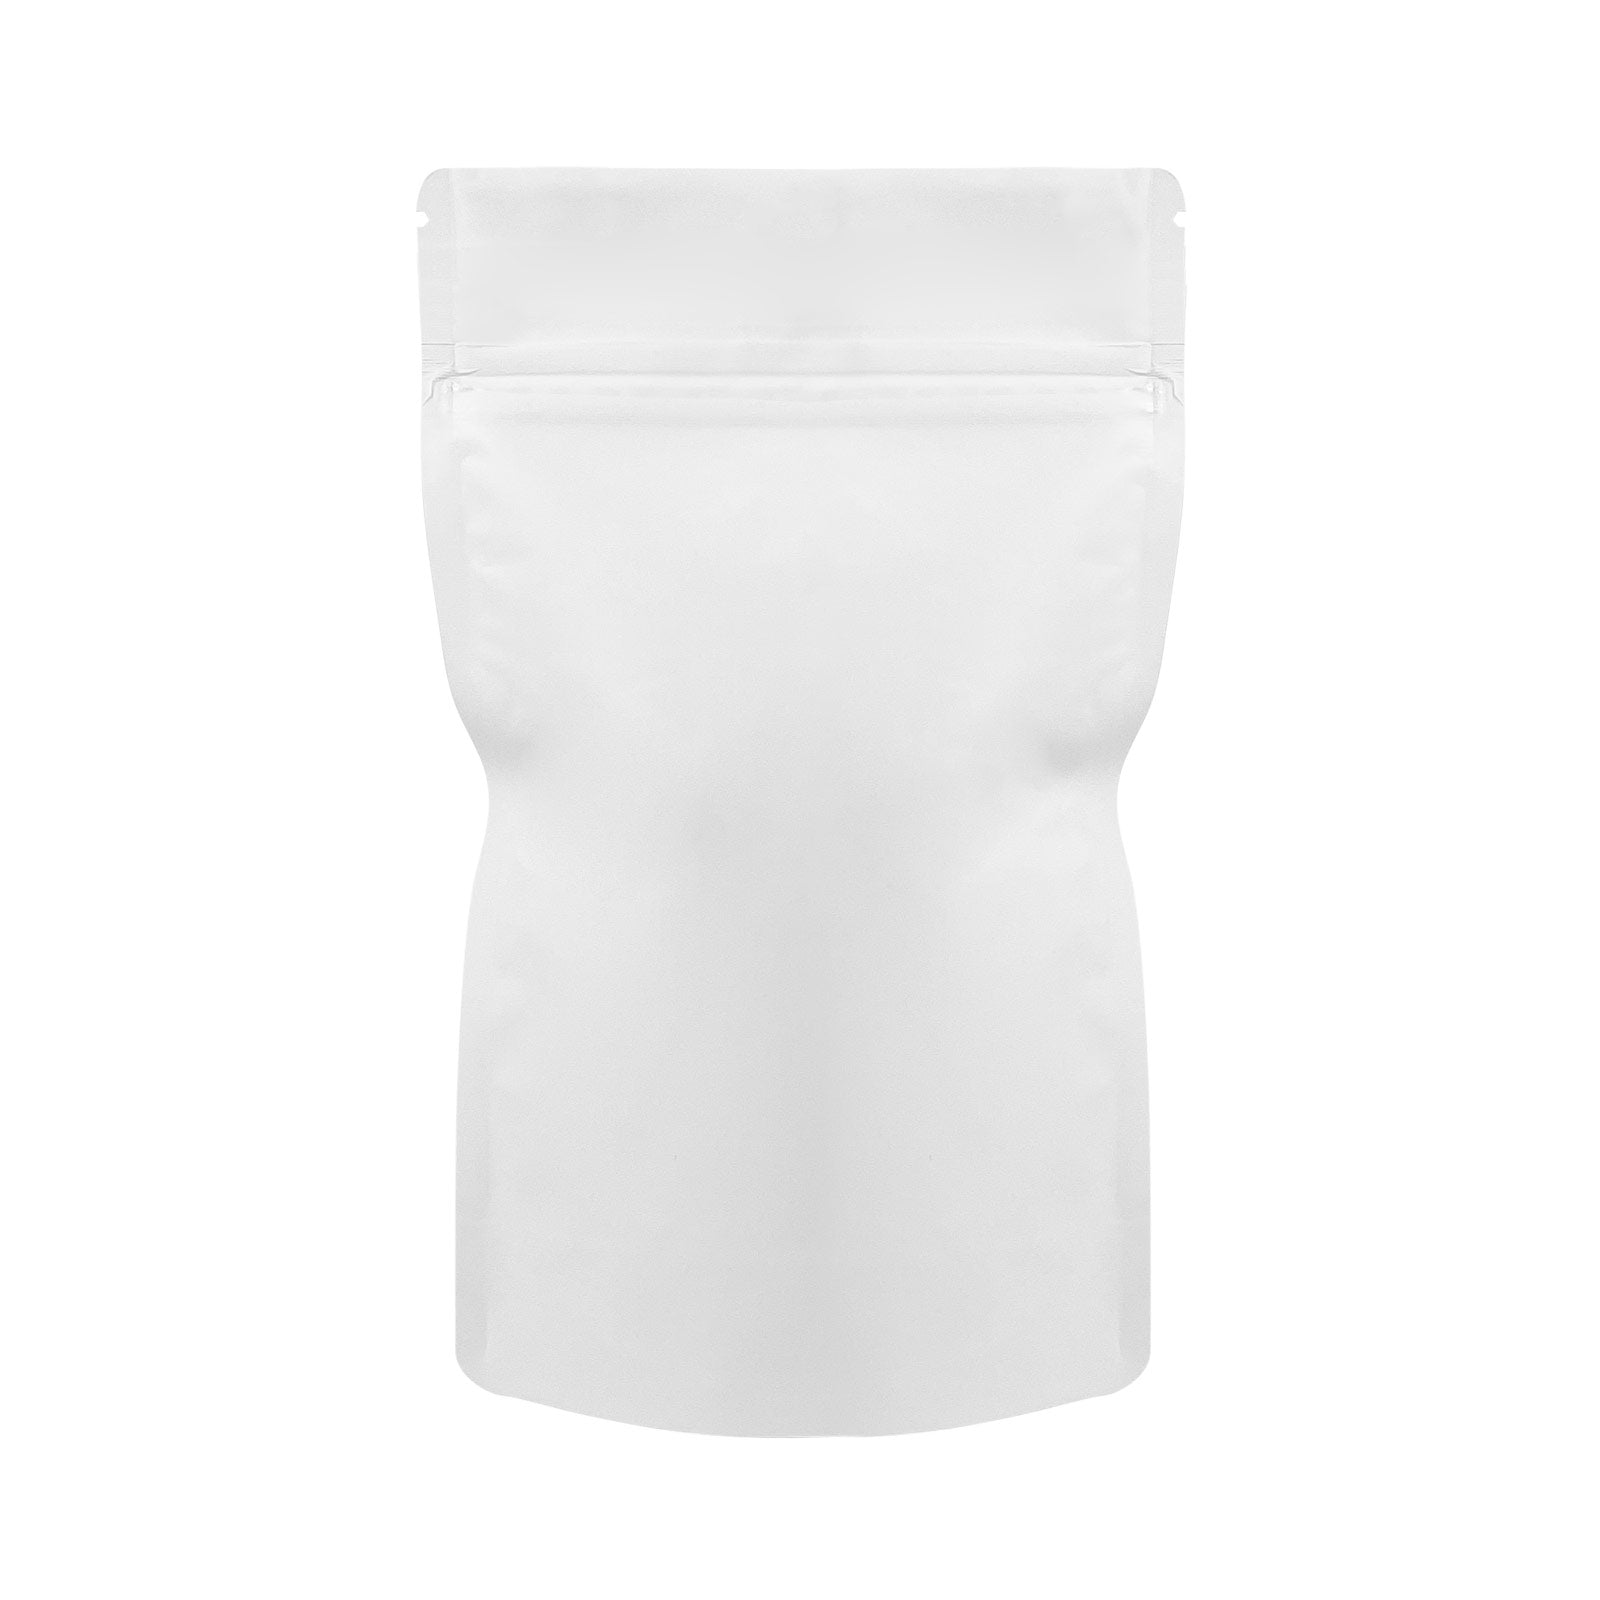 1/4 Ounce Child Resistant Bags All White 4"x6.5"+2" - 100 Count